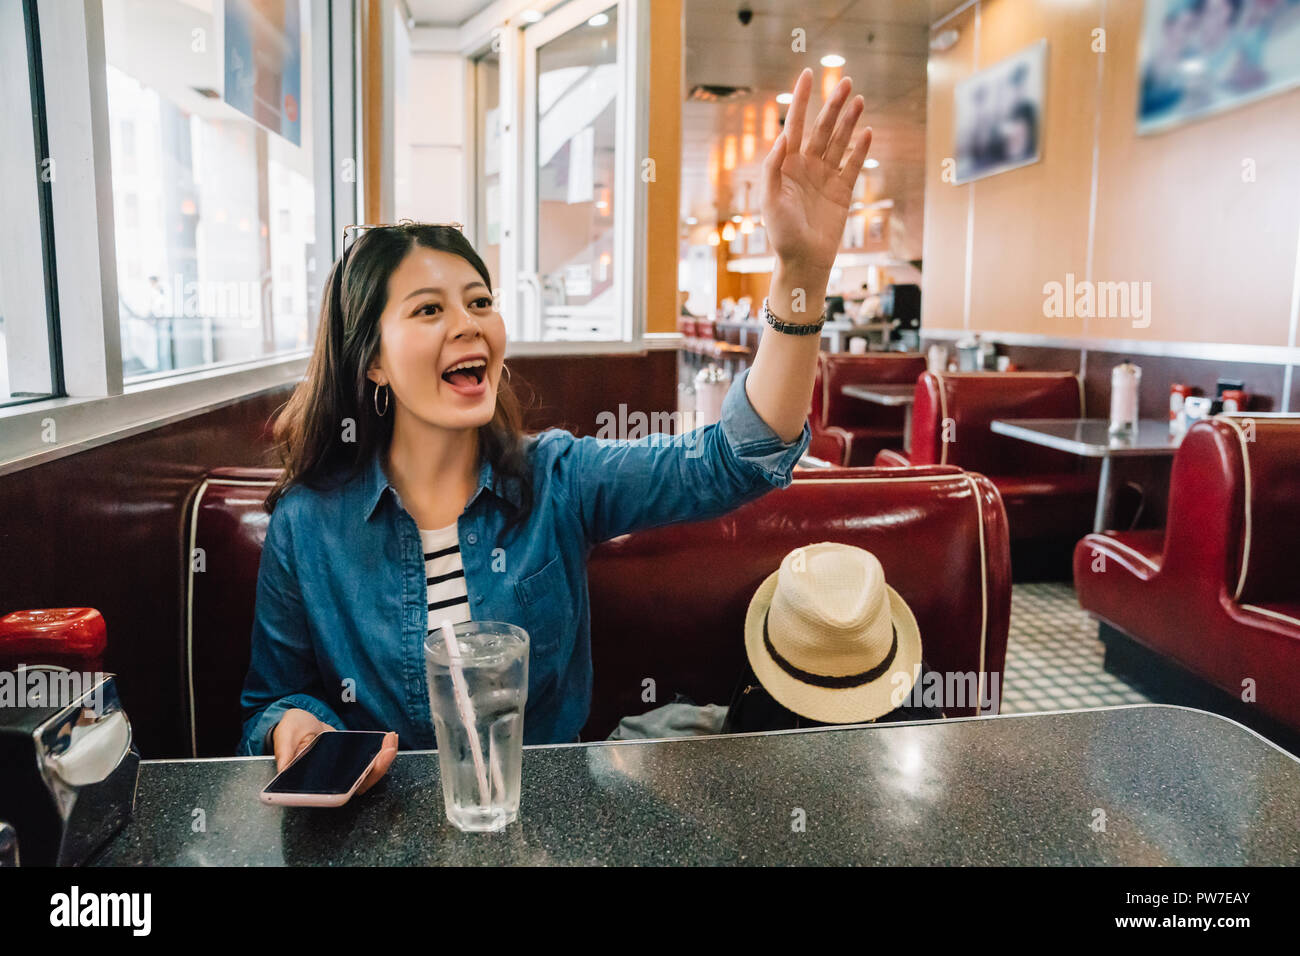 hungry lady cheerfully calling waiter to order food, because she finally find a restaurant to eat, young girl happy to see her friends show up and say Stock Photo